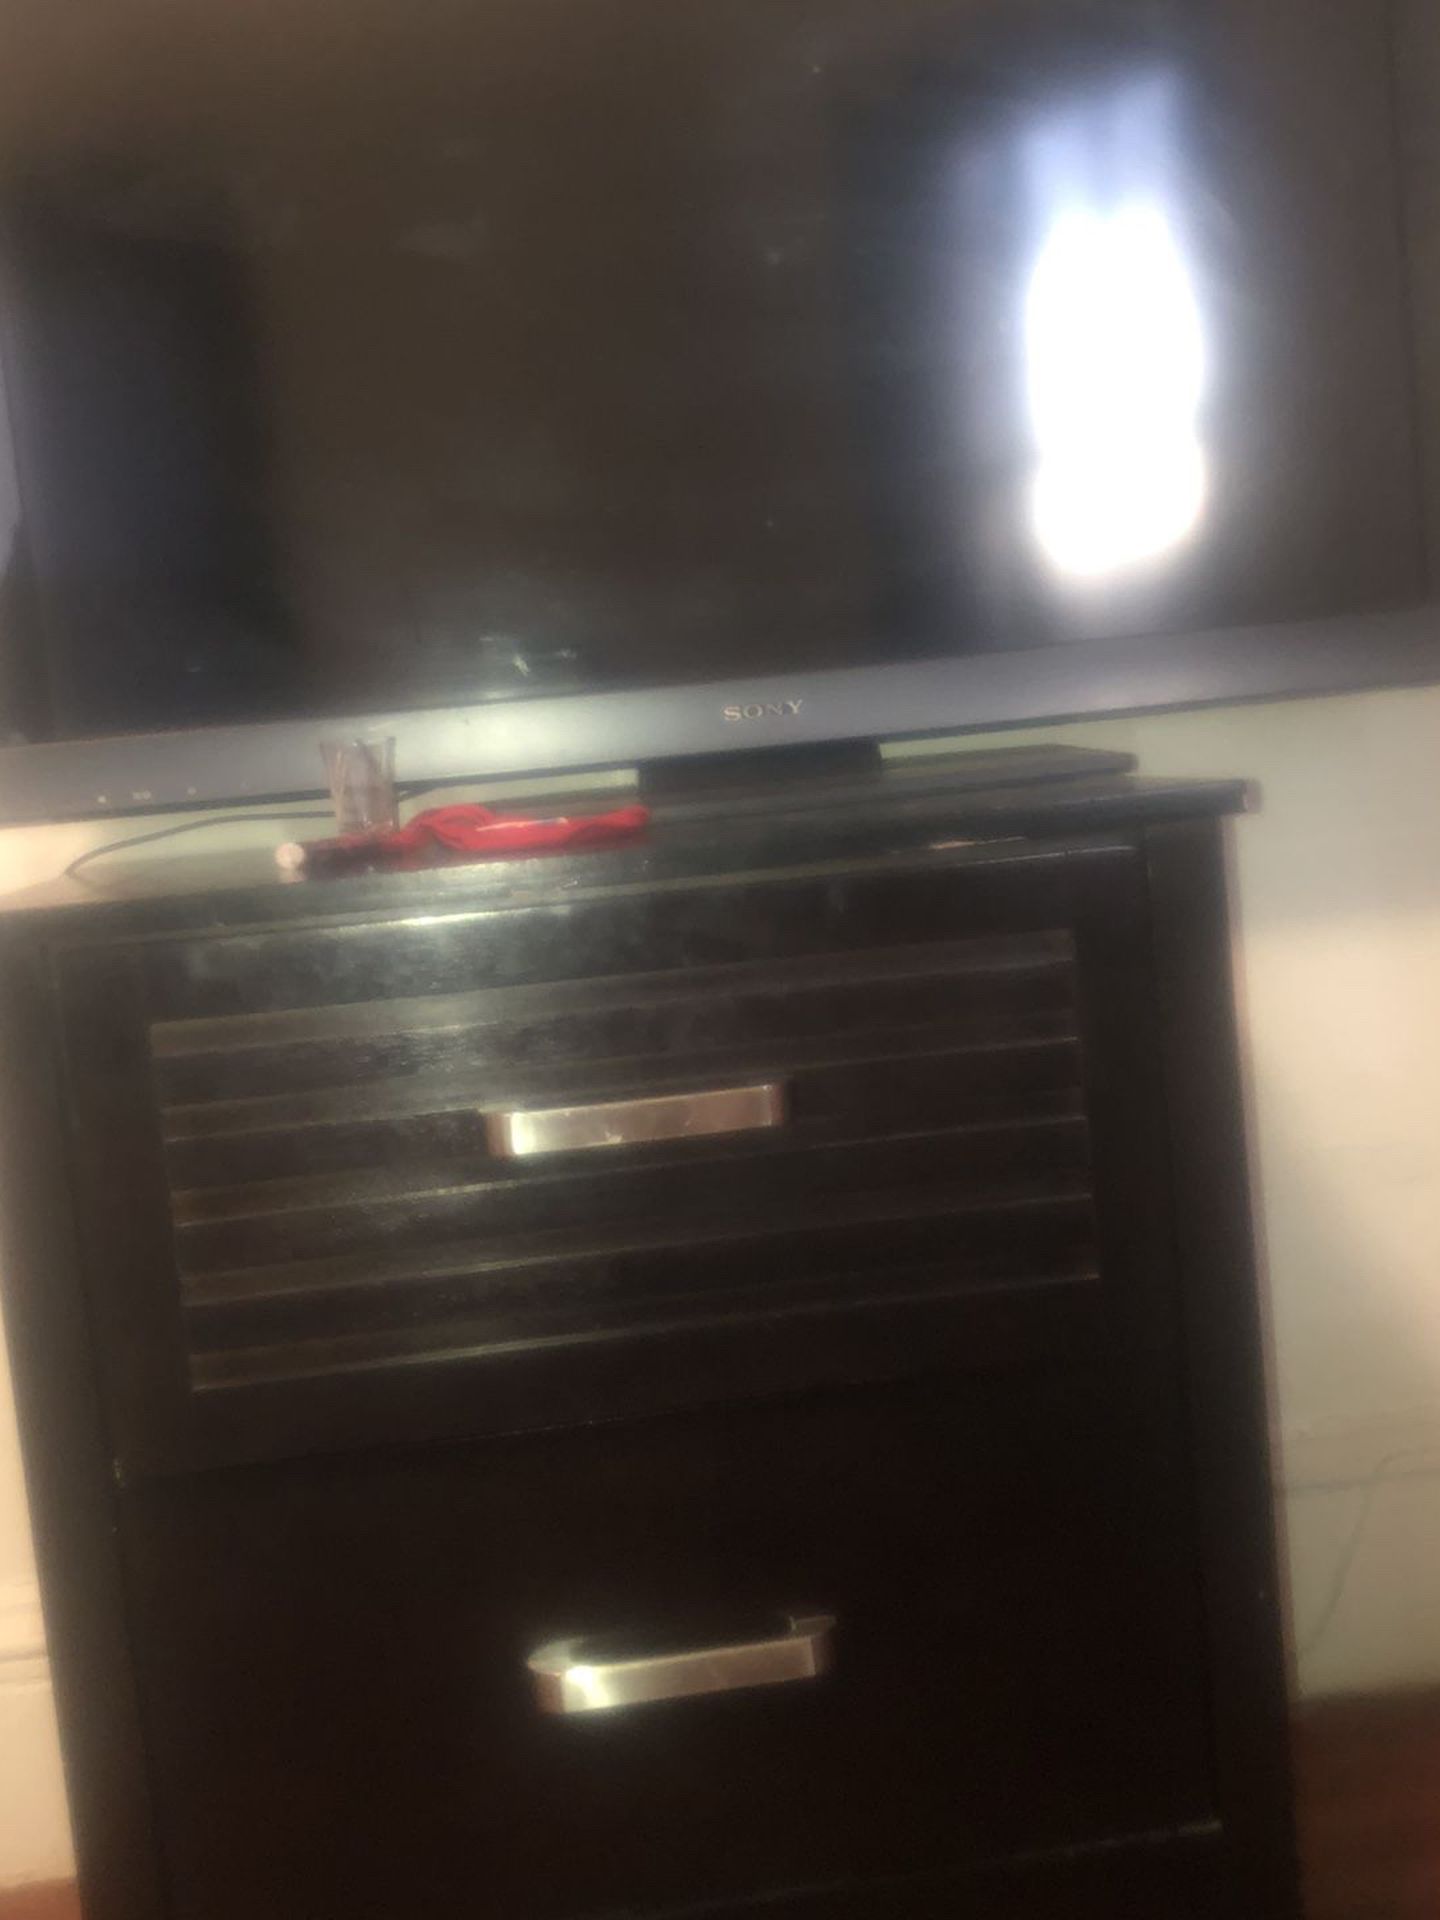 2 TV’s For $500 📦 Deal